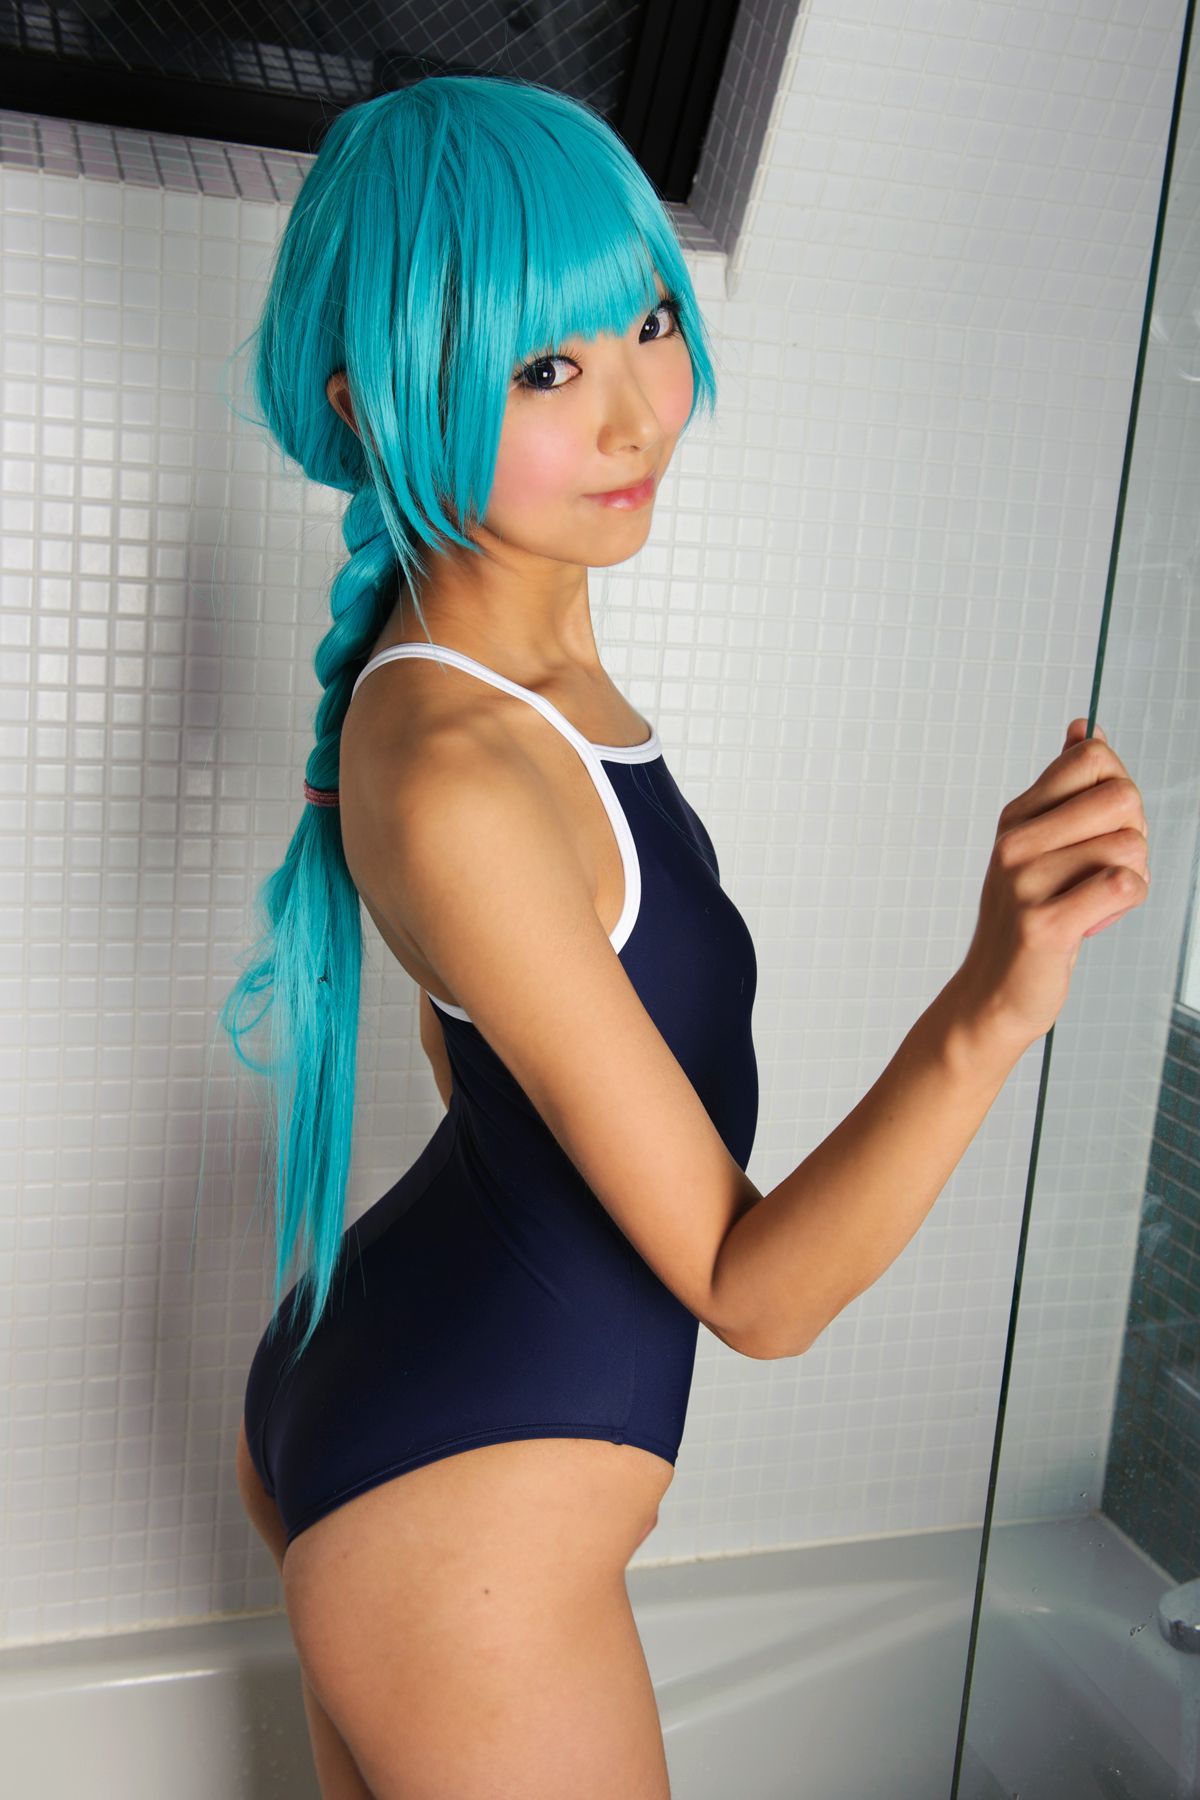 taotuhome[Cosplay] Necoco as Hatsune Miku from Vocaloid 套图第63张